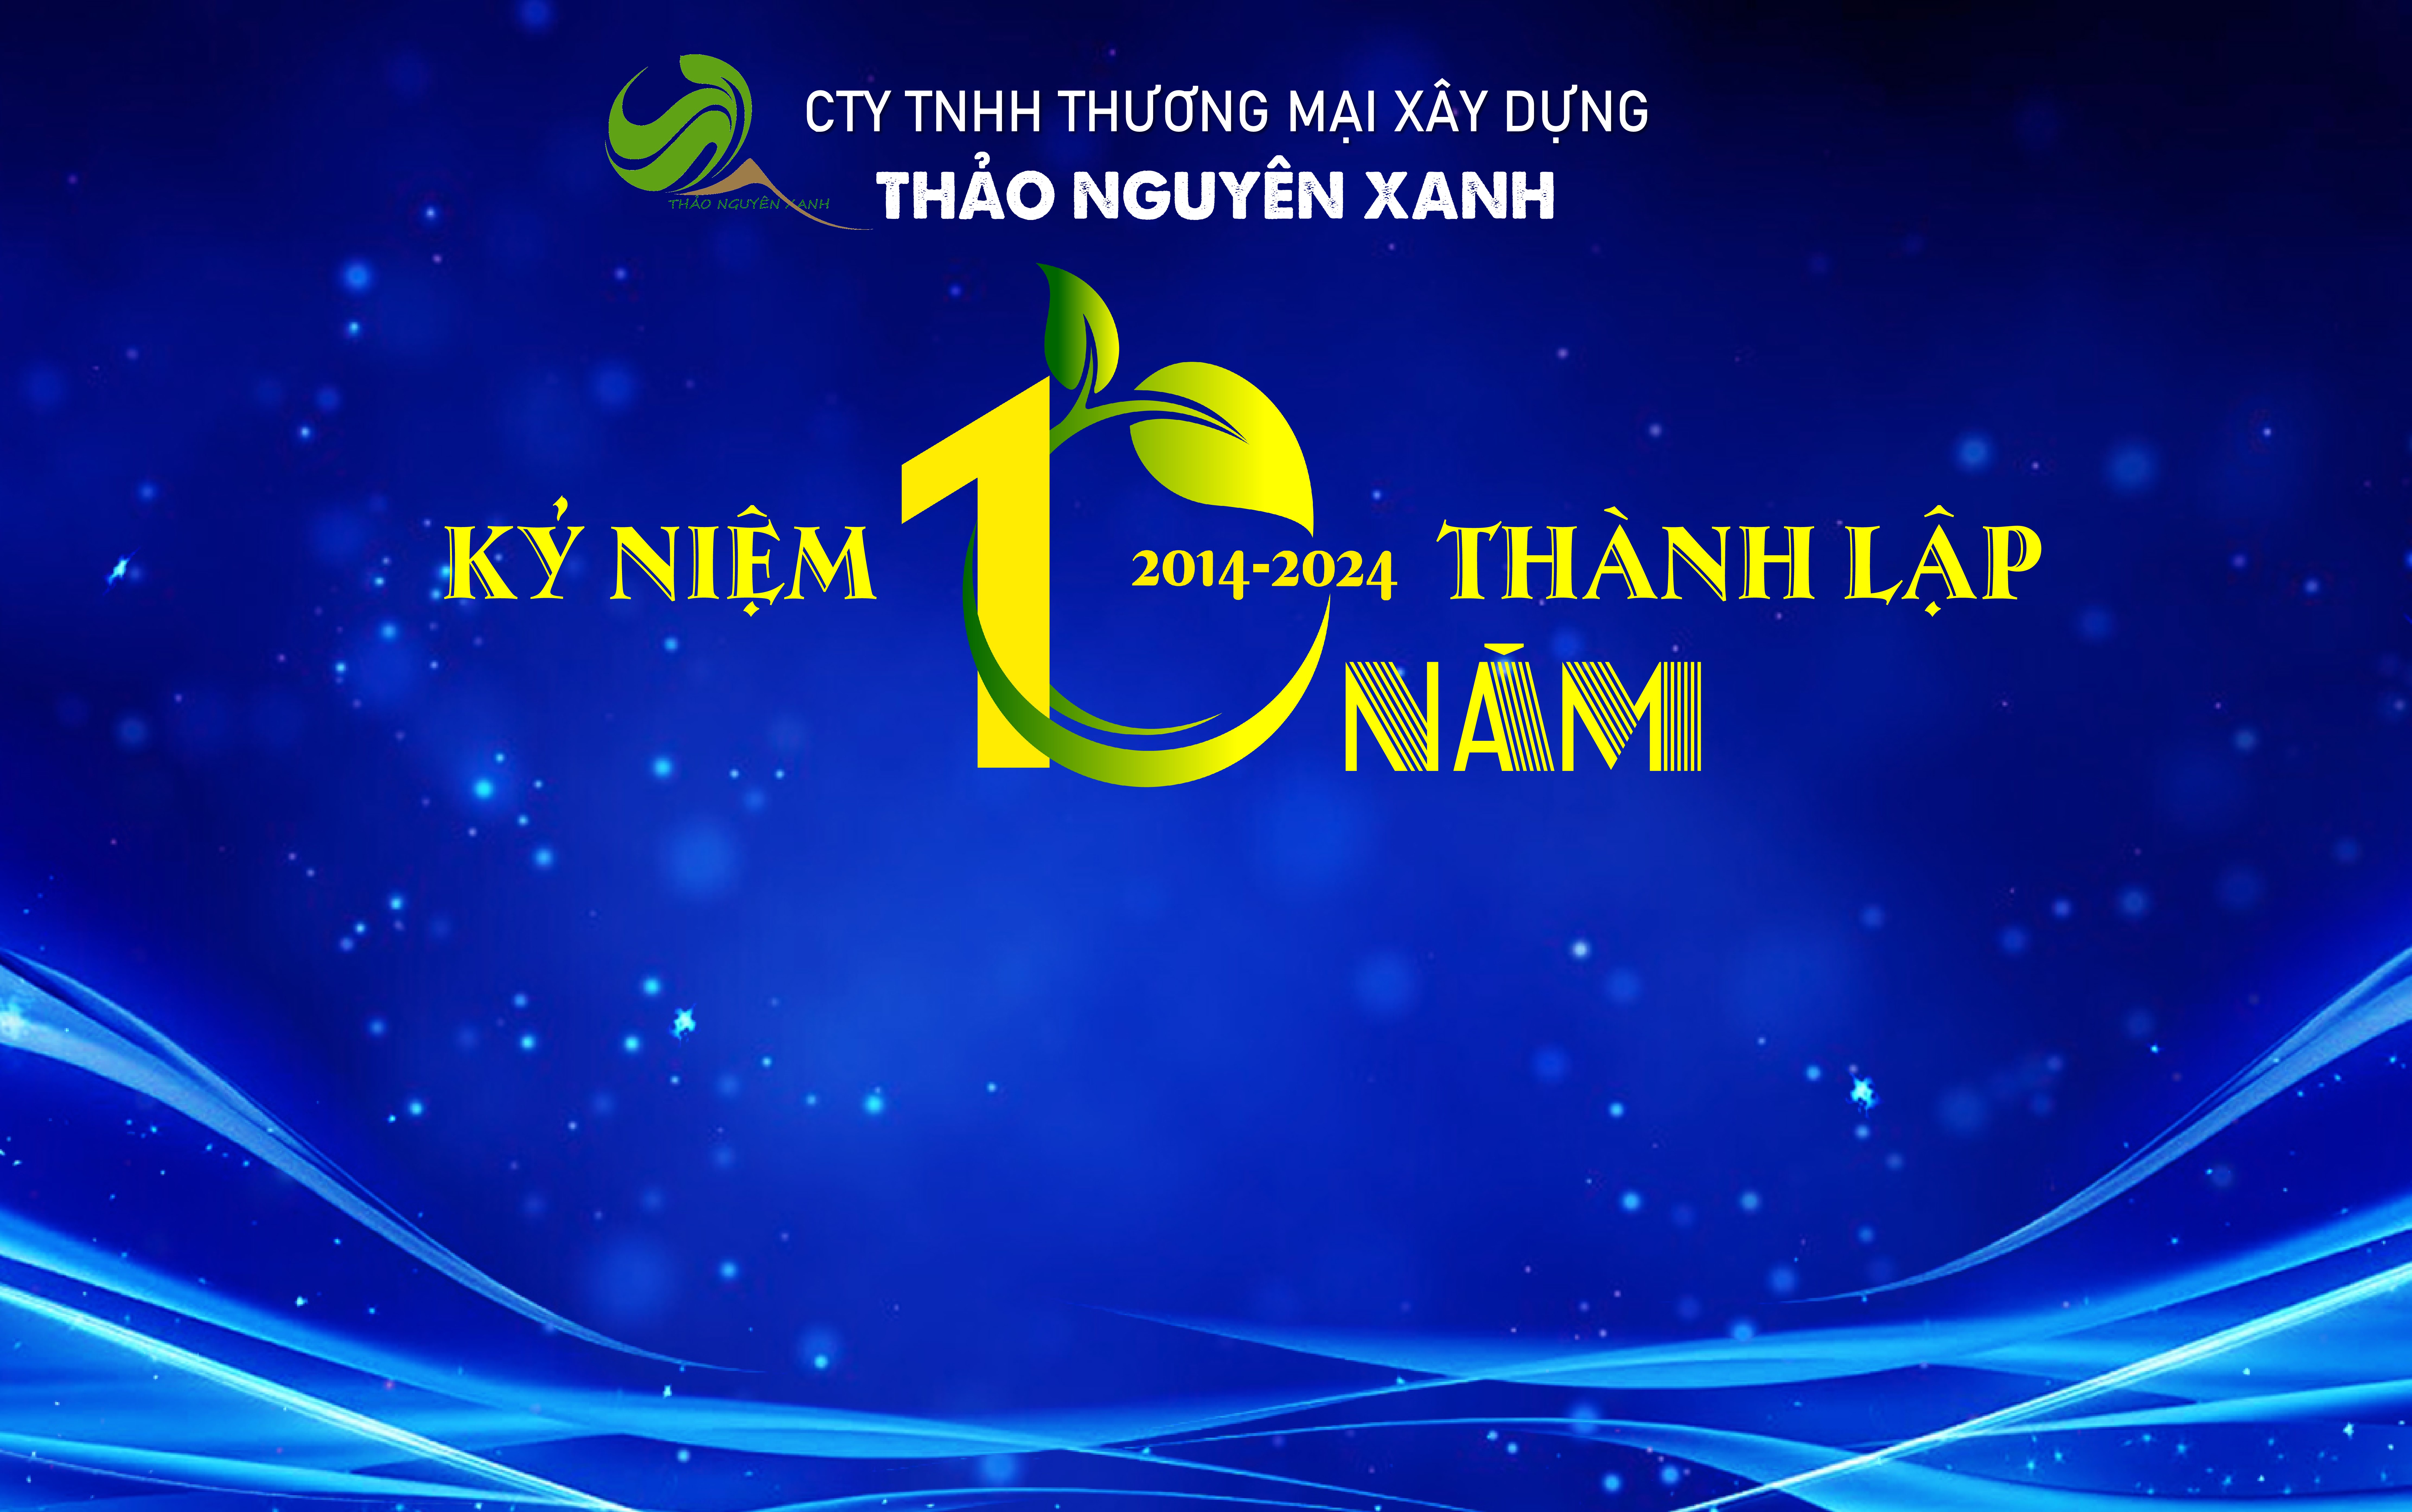 le-ky-niem-10-nam-thanh-lap-cong-ty-thao-nguyen-xanh